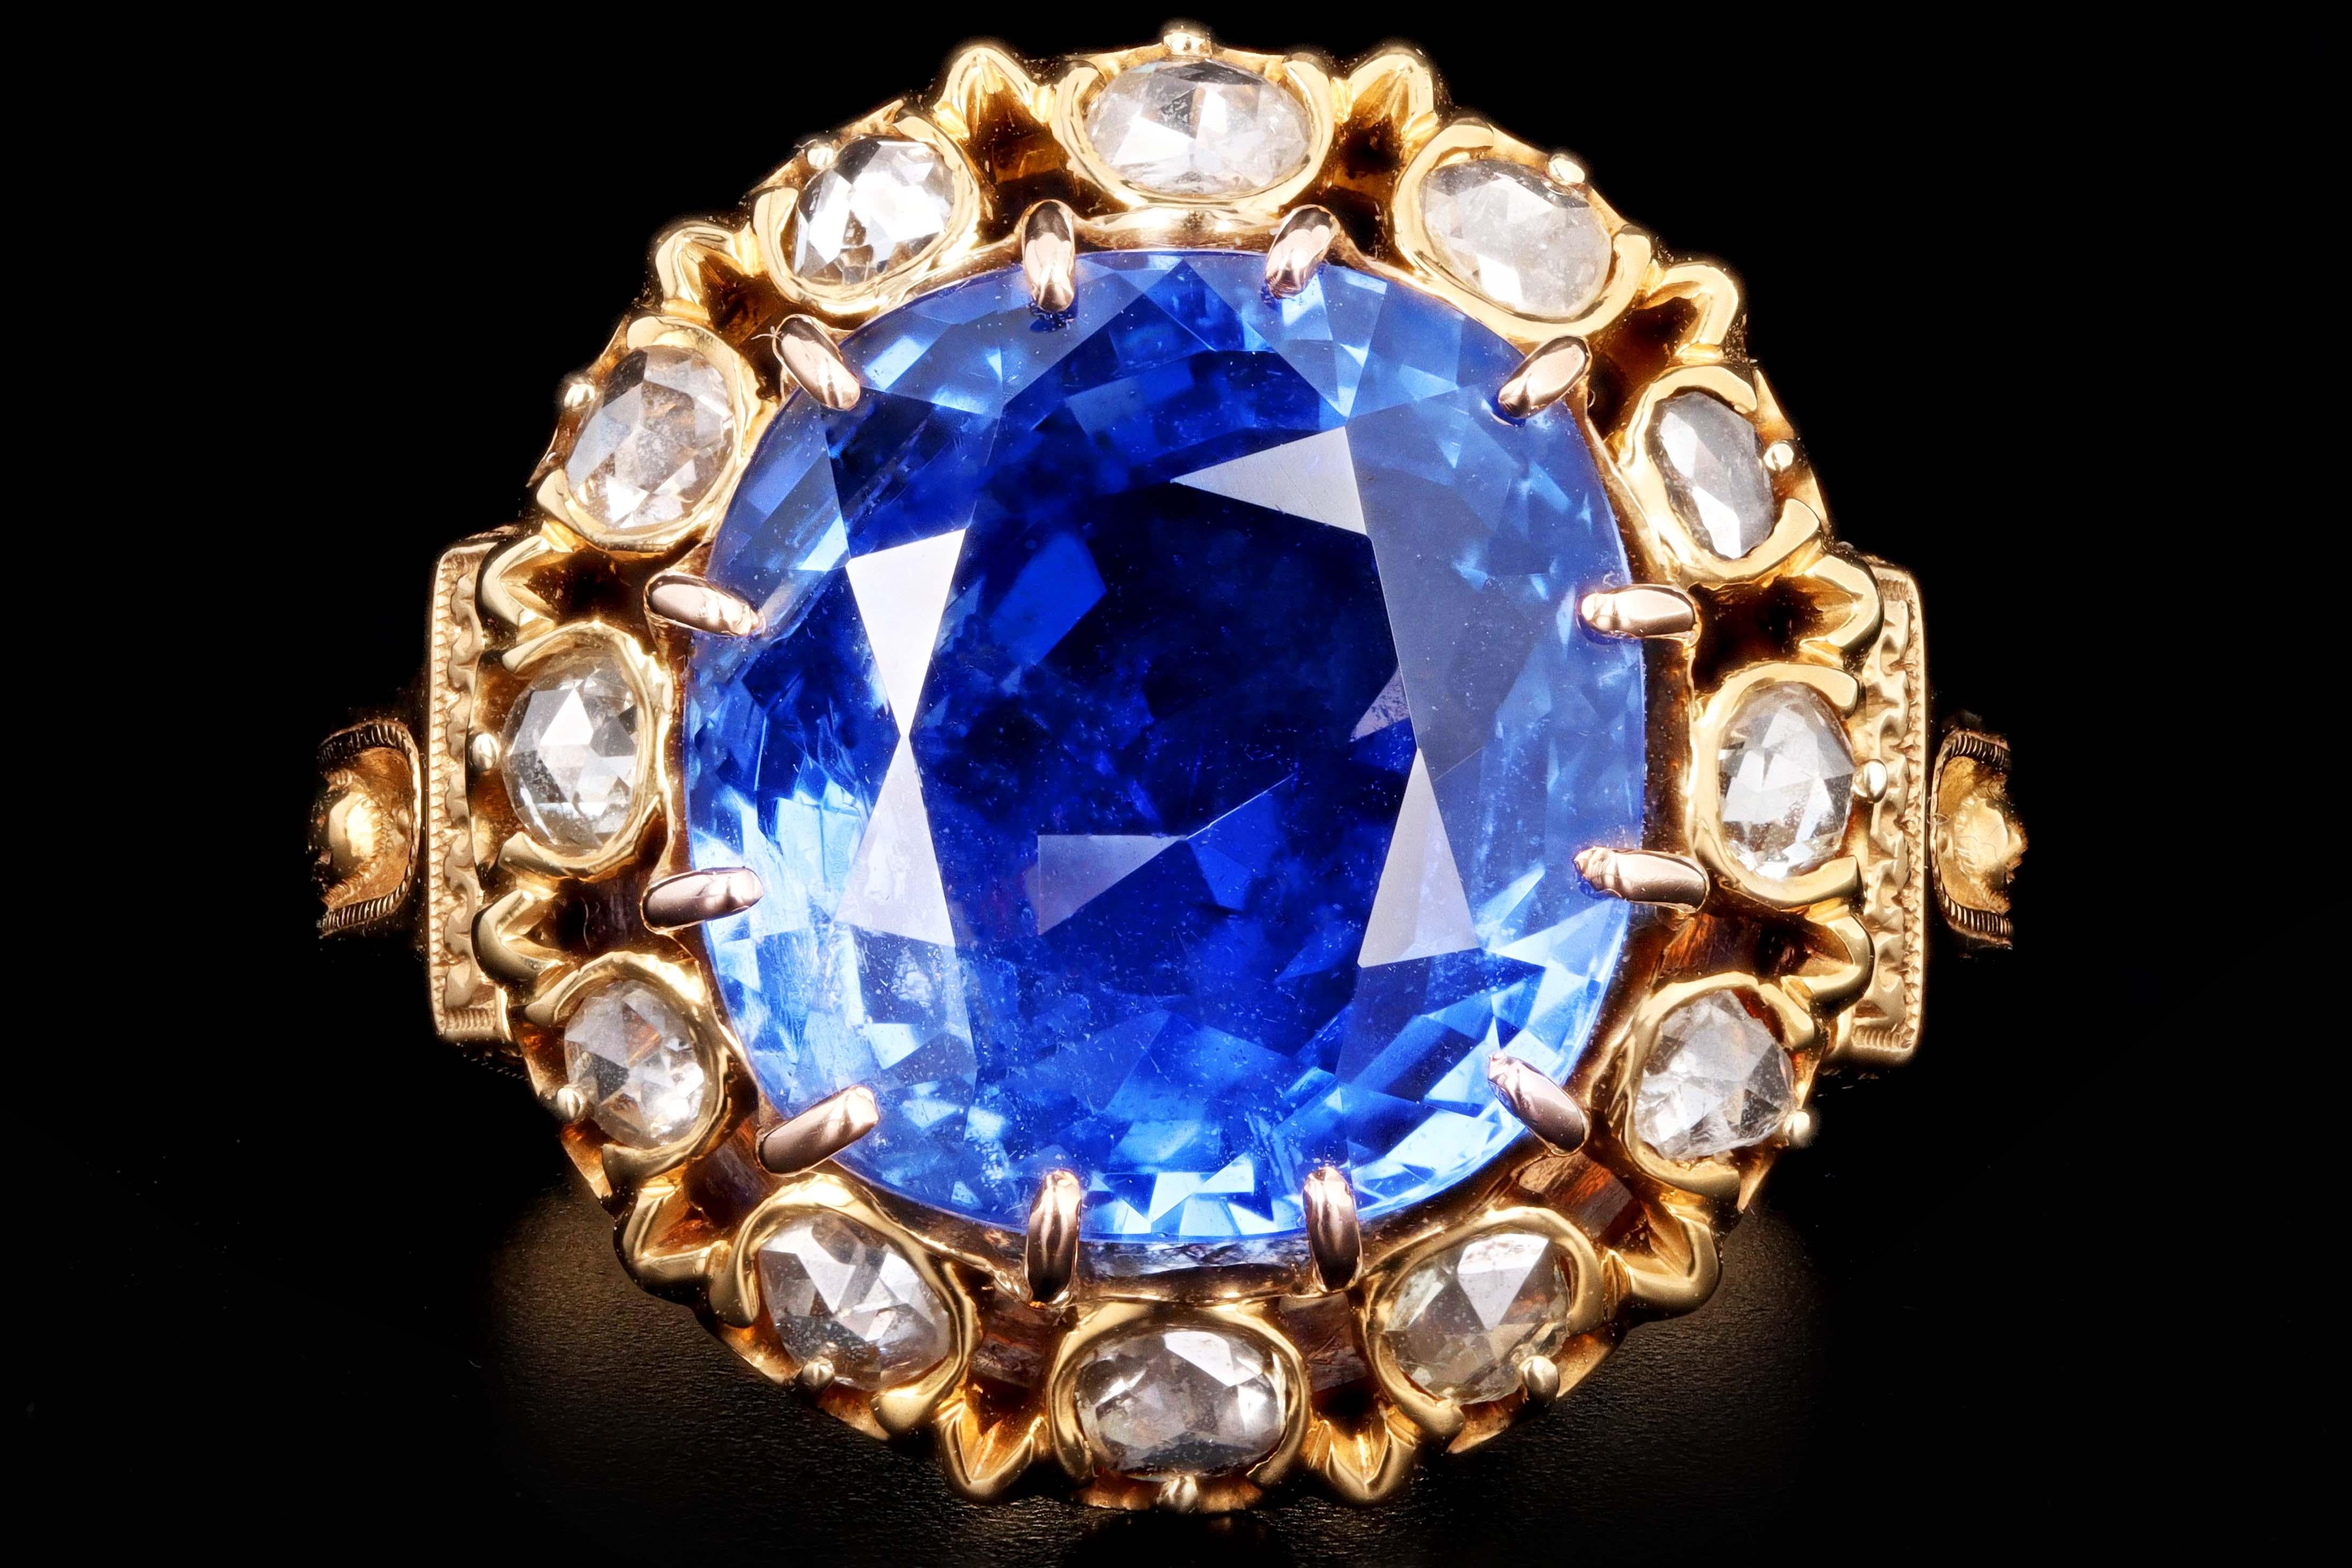 Era: Victorian 

Composition: 18K Yellow Gold 

Primary Stone: Natural, Untreated Burma(Myanmar) Sapphire 

Carat Weight: 10.73 Carats 

SSEF Gemstone Report Number: 71758

Accent Stone: Twelve Rose Cut Diamonds 

Ring Size: 8.25

Ring Weight: 10.1